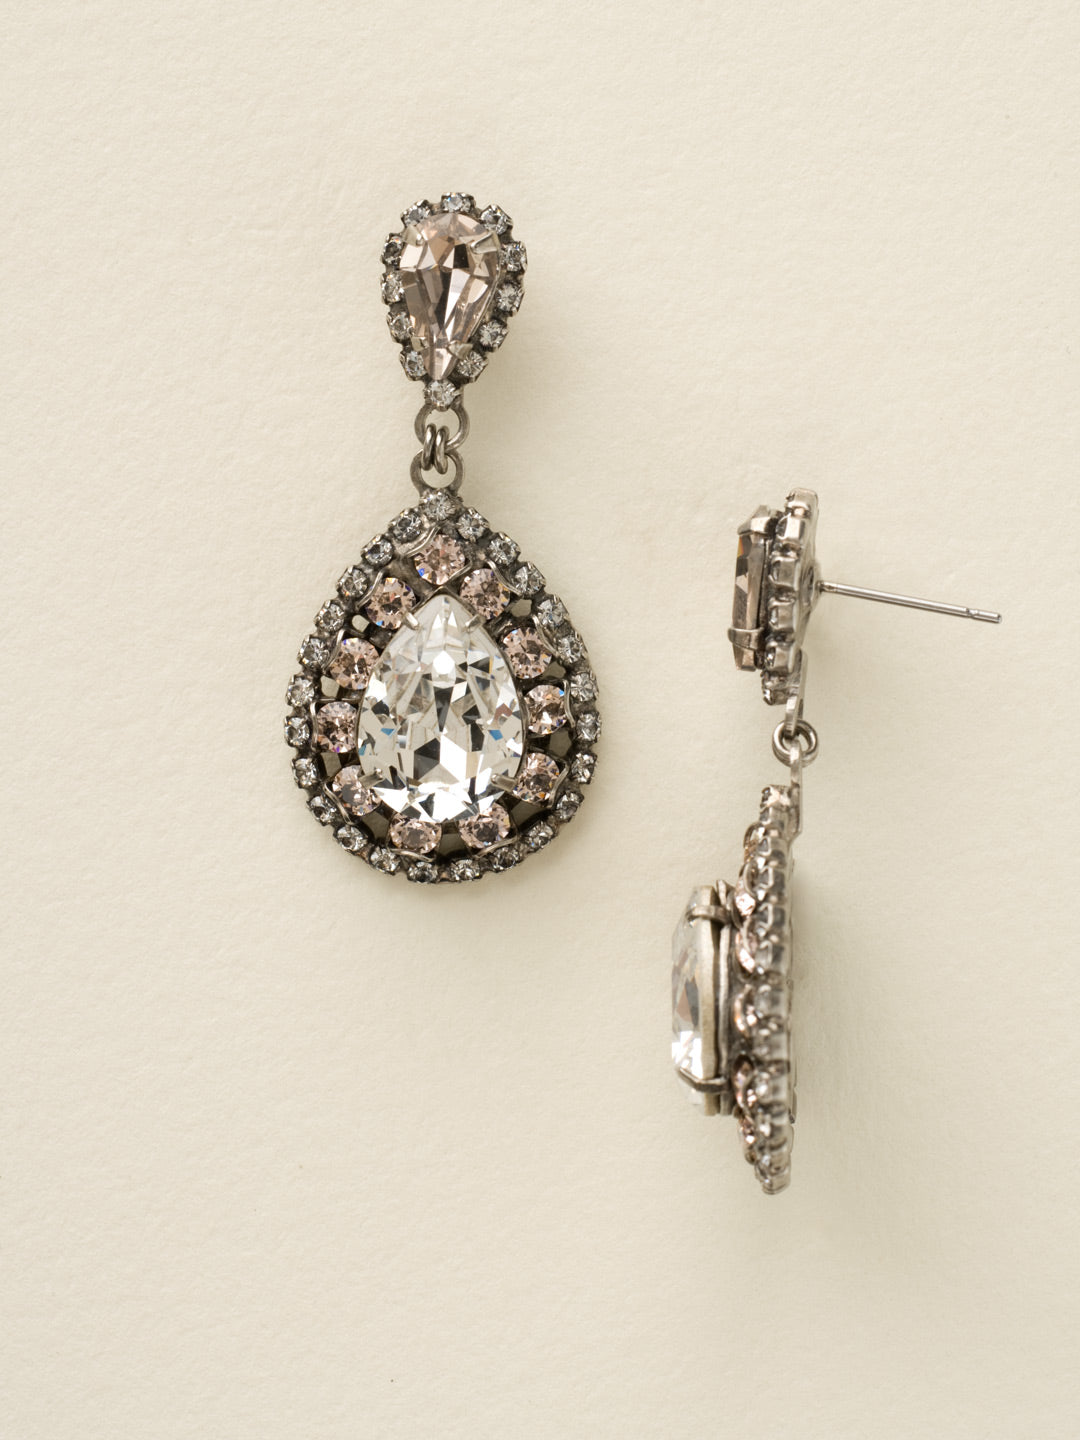 Oval Encrusted Crystal Dangle Earrings - ECW47ASSNB - <p>These oval earrings will pair perfectly with that classic updo! Teardrop crystals are the center of this brilliant statement earring. From Sorrelli's Snow Bunny collection in our Antique Silver-tone finish.</p>